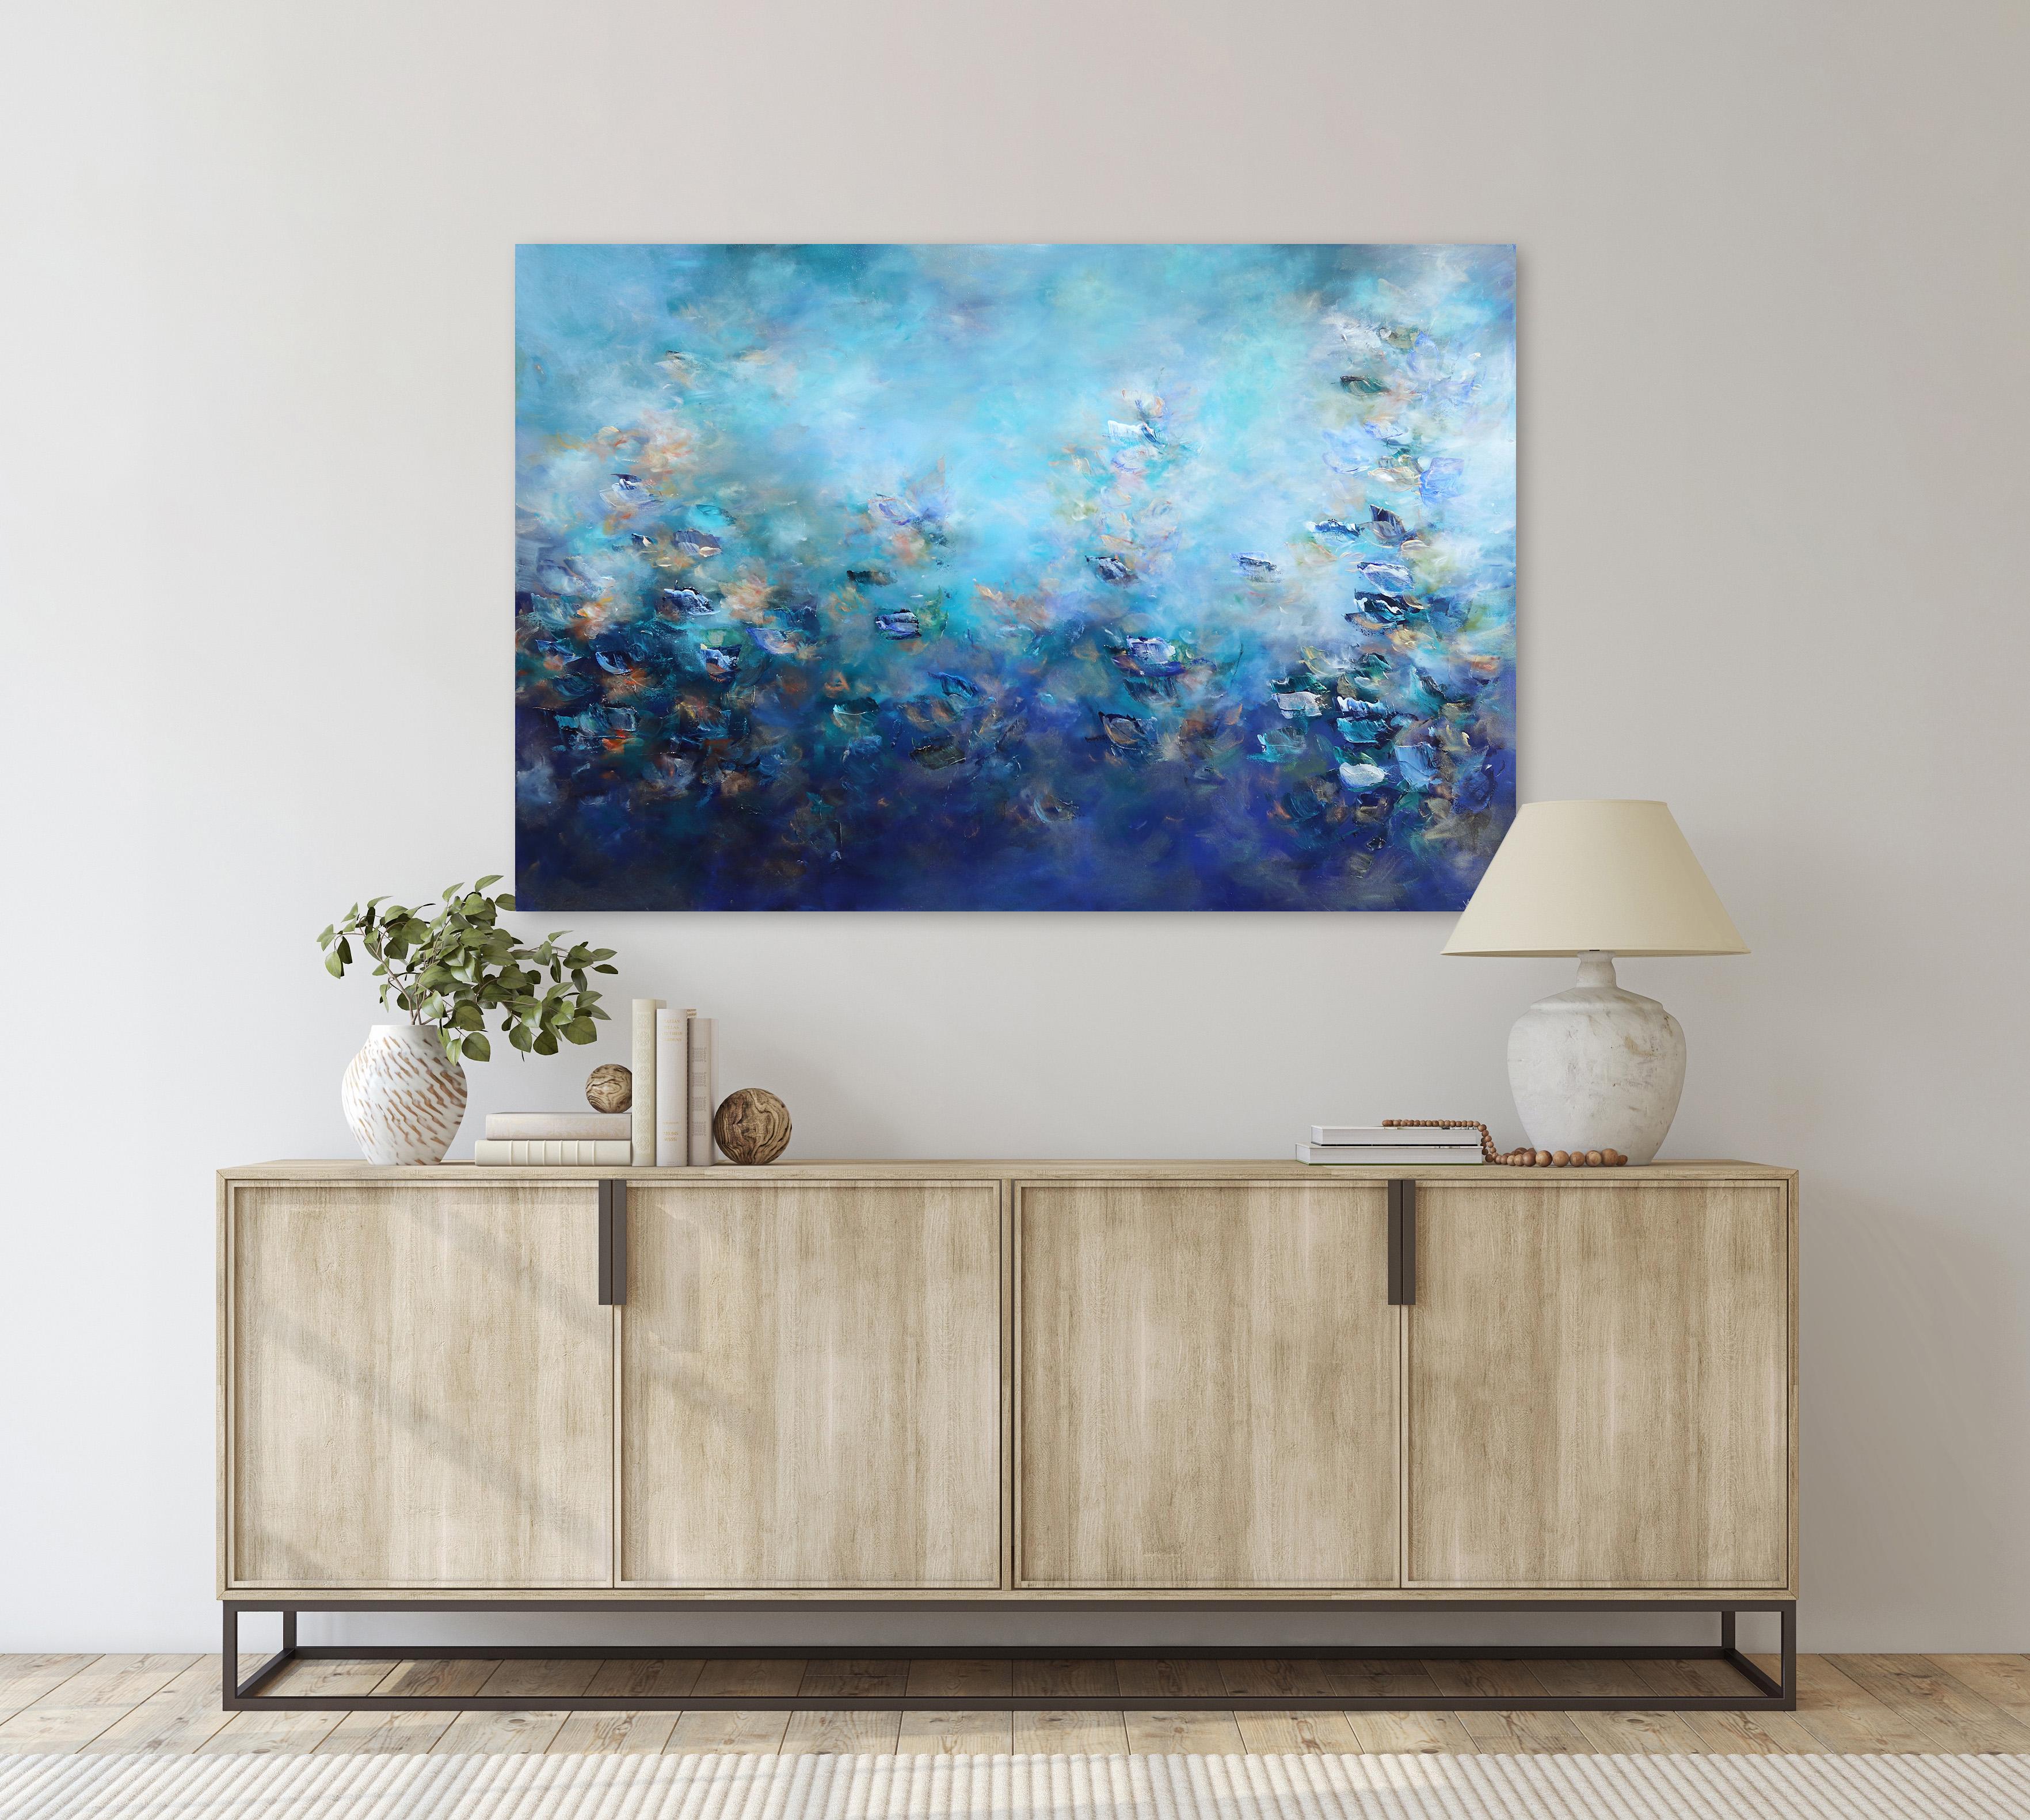 Drawing inspiration from an immersive and impressionistic interpretation of nature, Canadian artist Vé Boisvert paints textural original artworks that capture the fleeting effects of light and color expressed in the ephemeral qualities of her